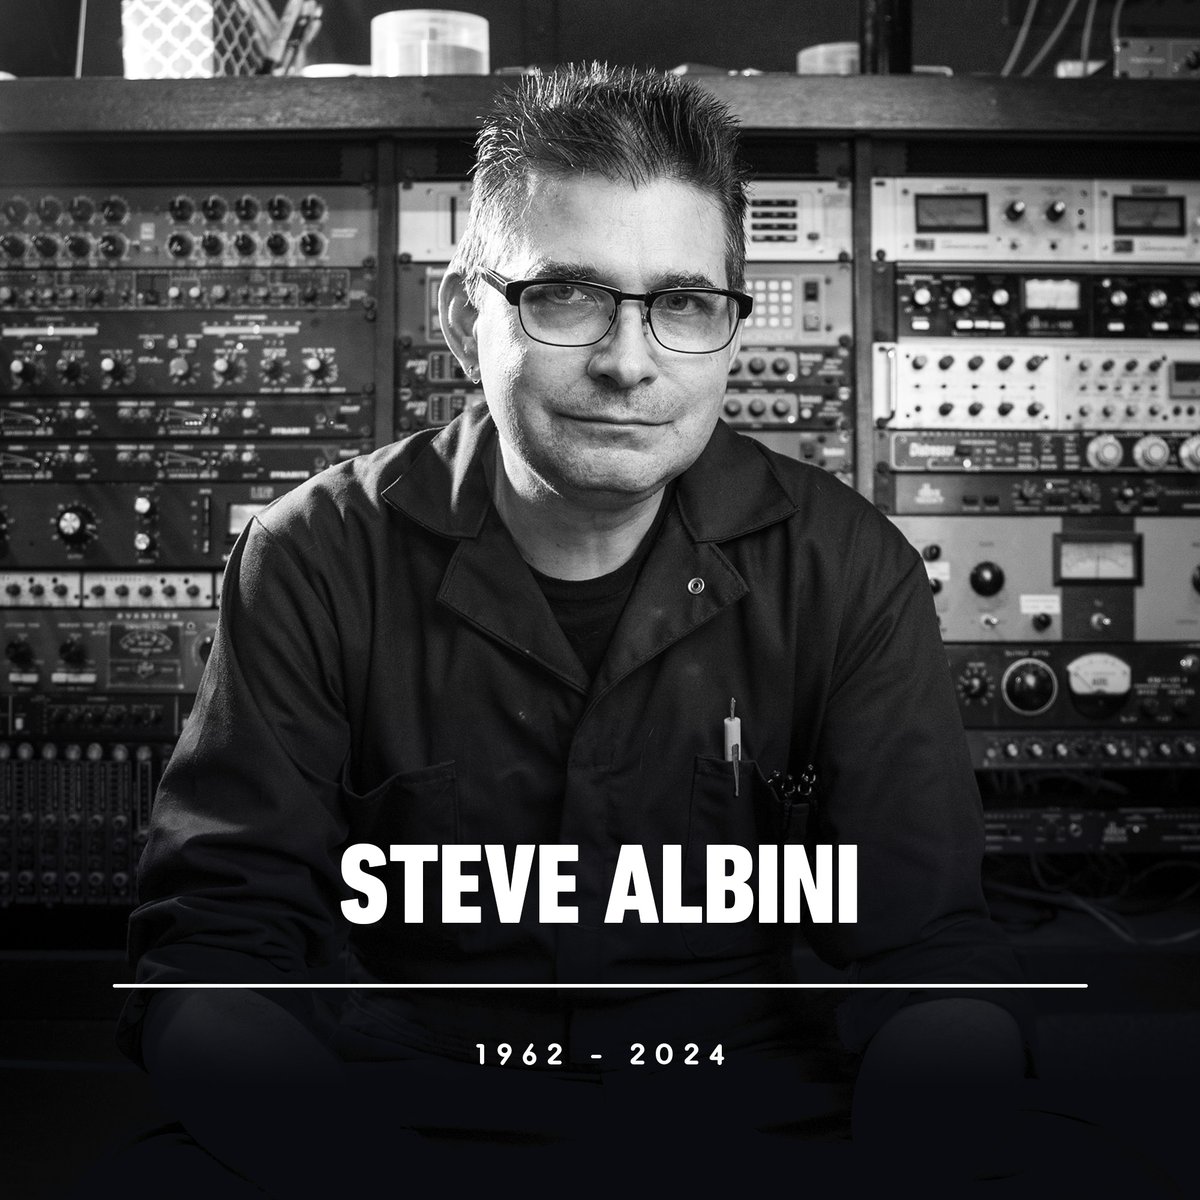 Steve Albini, the legendary musician and producer who helped develop the sound on iconic albums by Nirvana, Pixies, Bush, PJ Harvey, and more, has died at the age of 61.